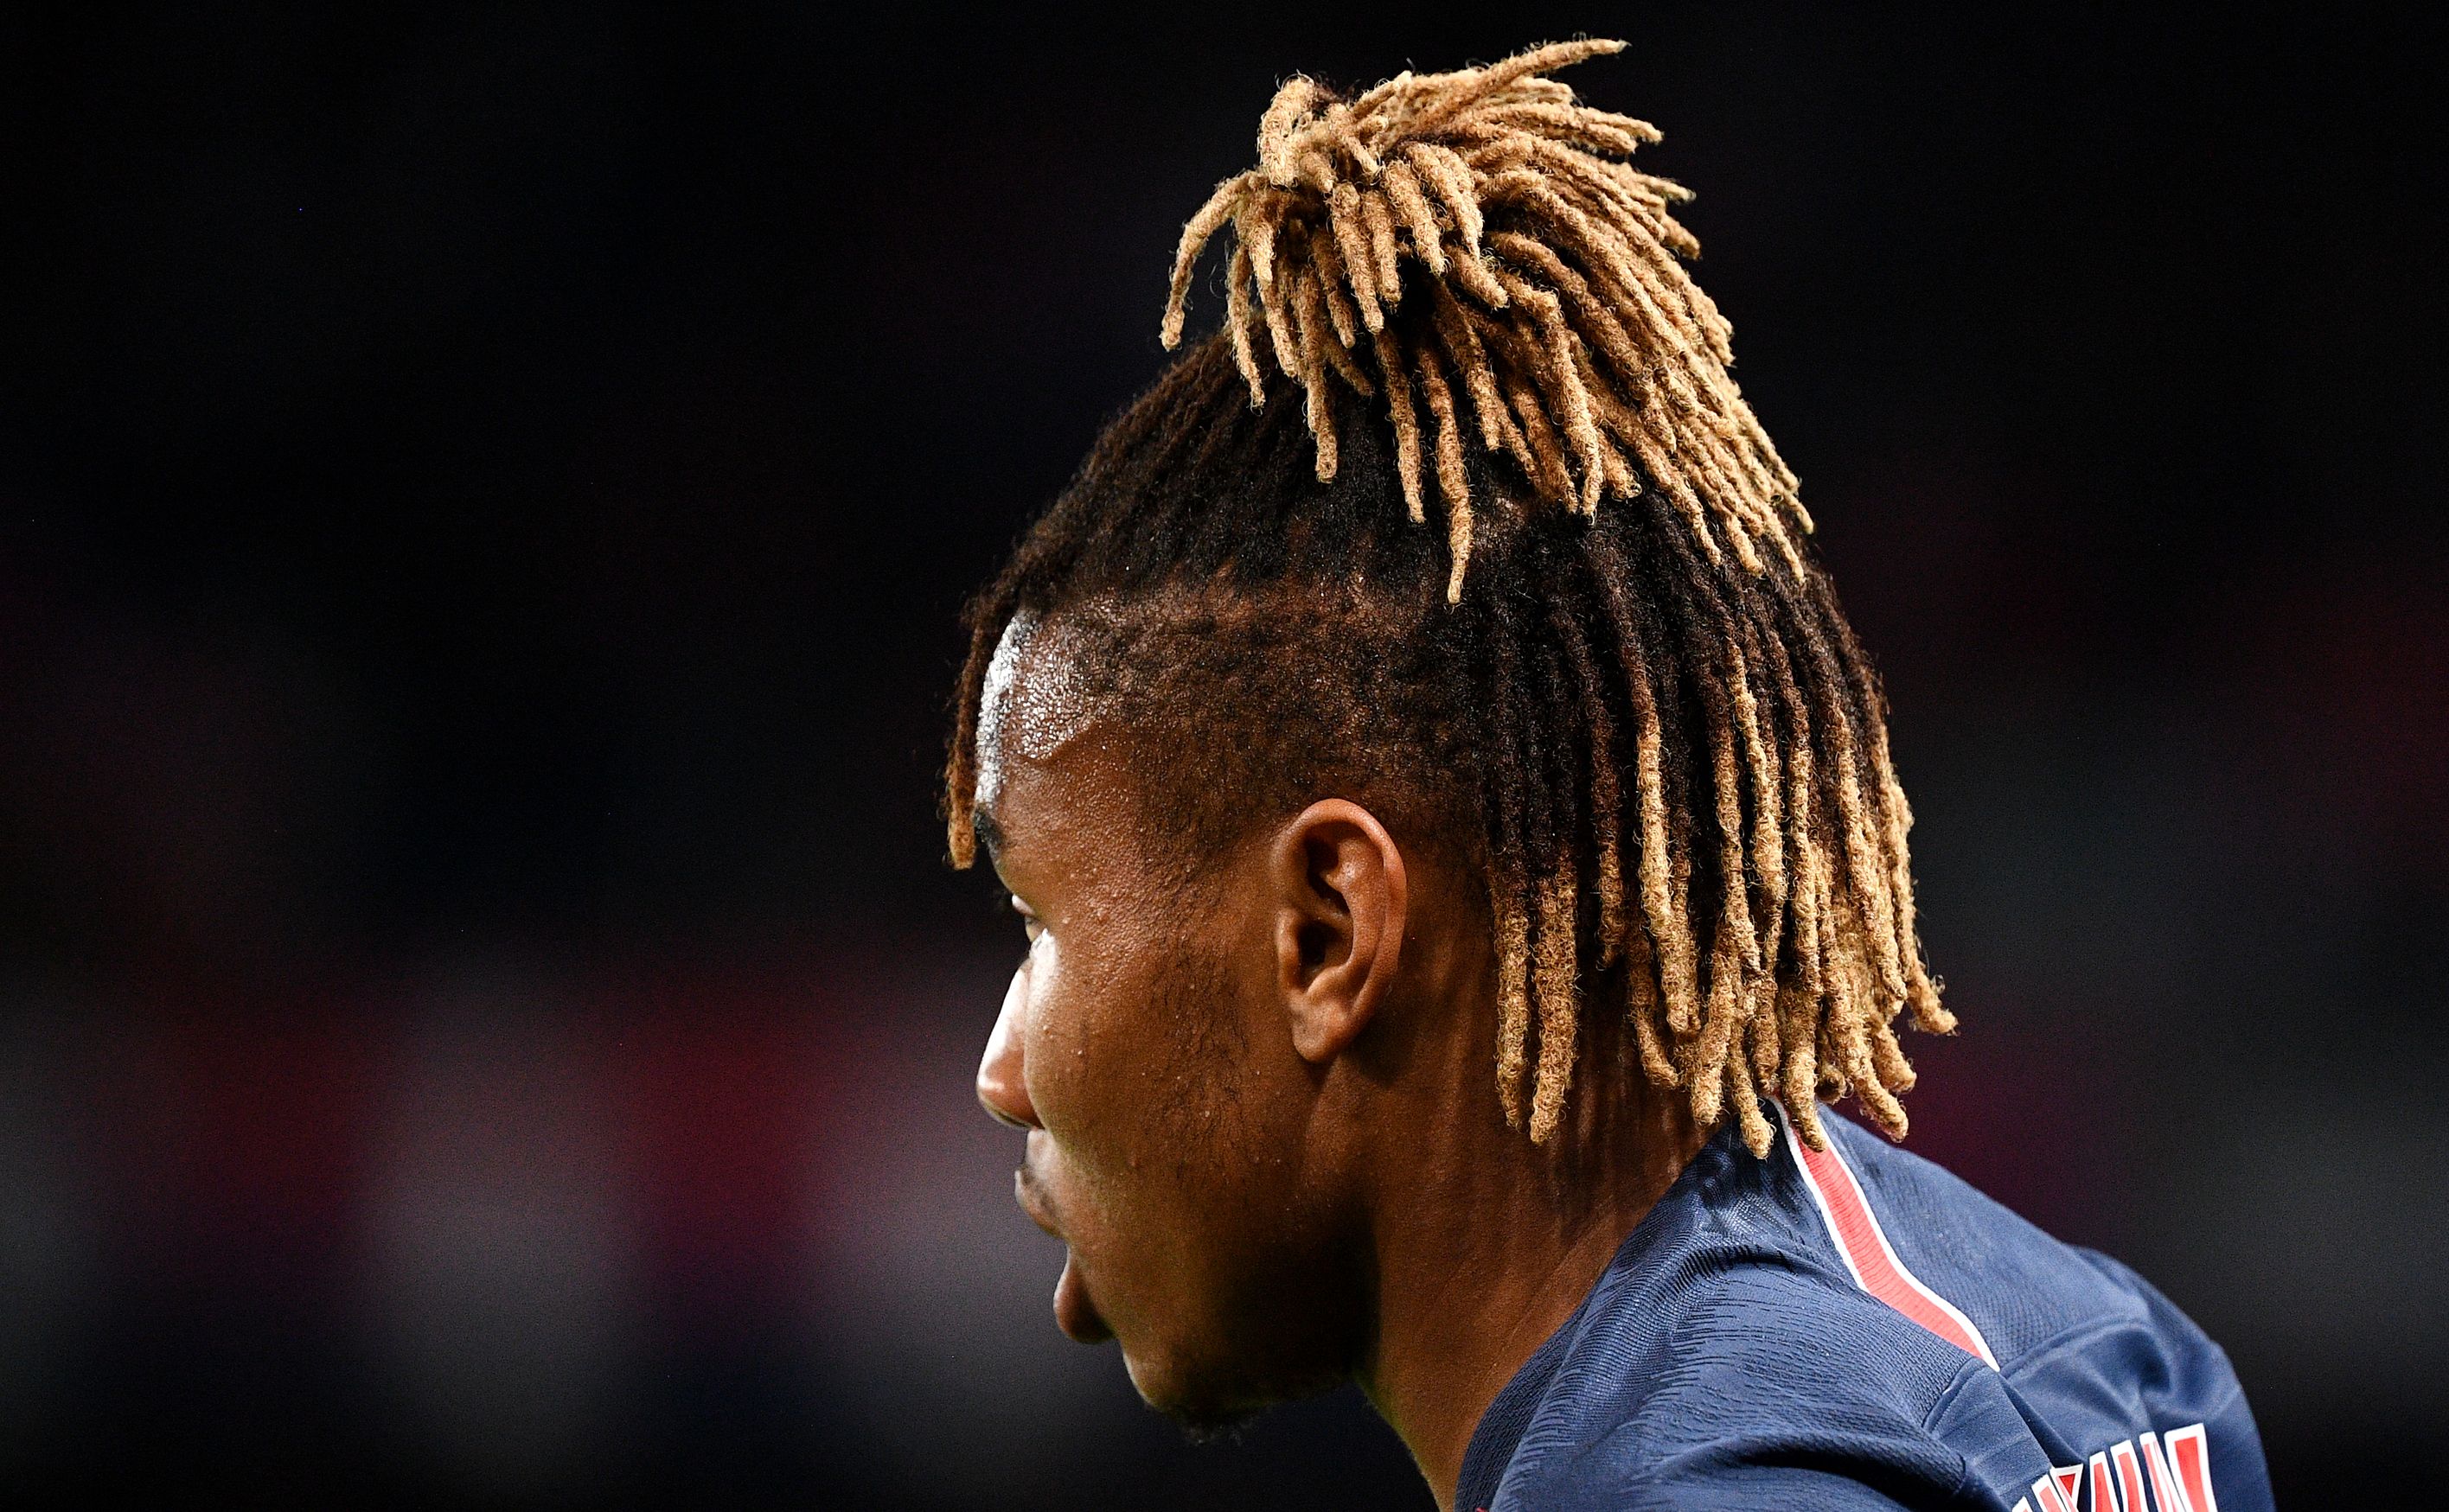 A picture shows the haircut of Paris Saint-Germain's French midfielder Christopher Nkunku during the French L1 football match between Paris Saint-Germain (PSG) and Saint-Etienne (ASSE) at the Parc des Princes stadium in Paris on September 14, 2018. (Photo by FRANCK FIFE / AFP)        (Photo credit should read FRANCK FIFE/AFP/Getty Images)